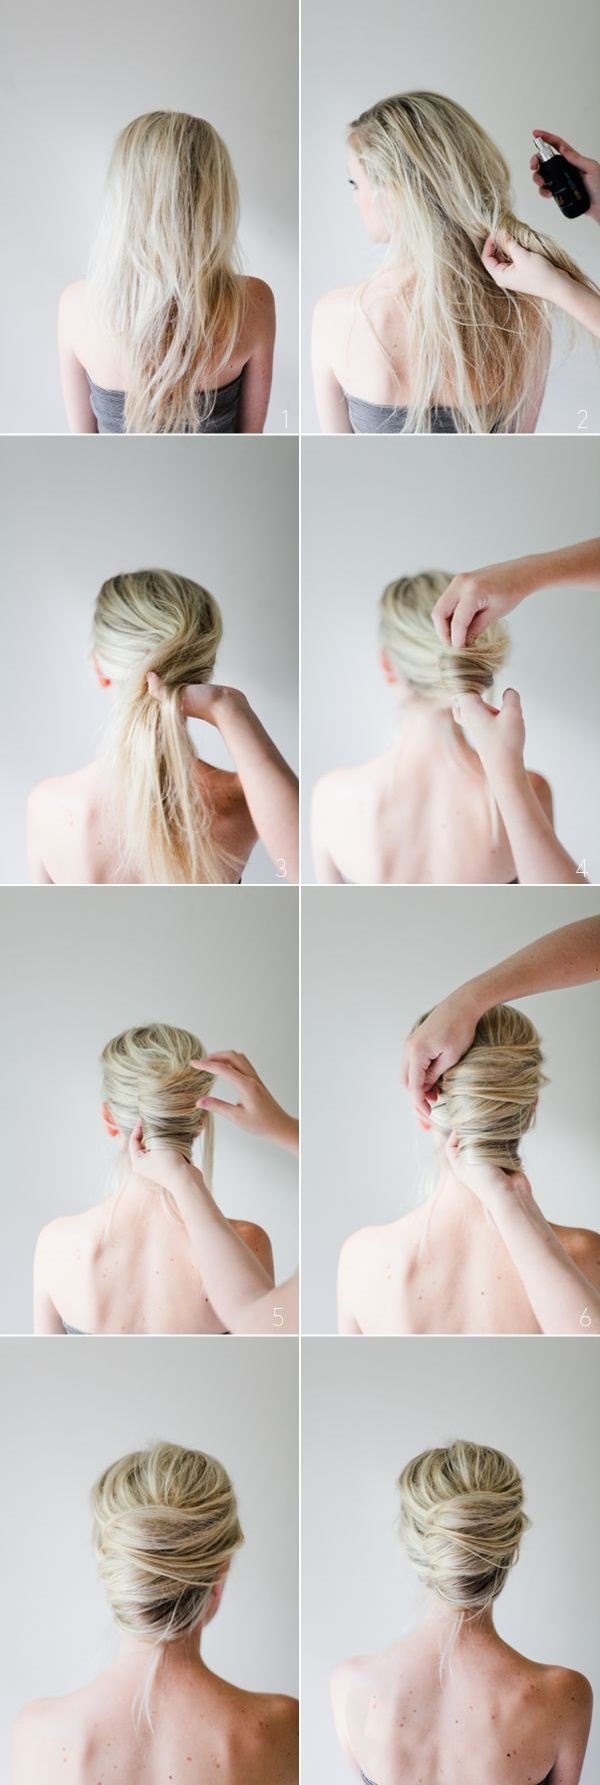 Easy Step By Step Hairstyles for Long Hair13